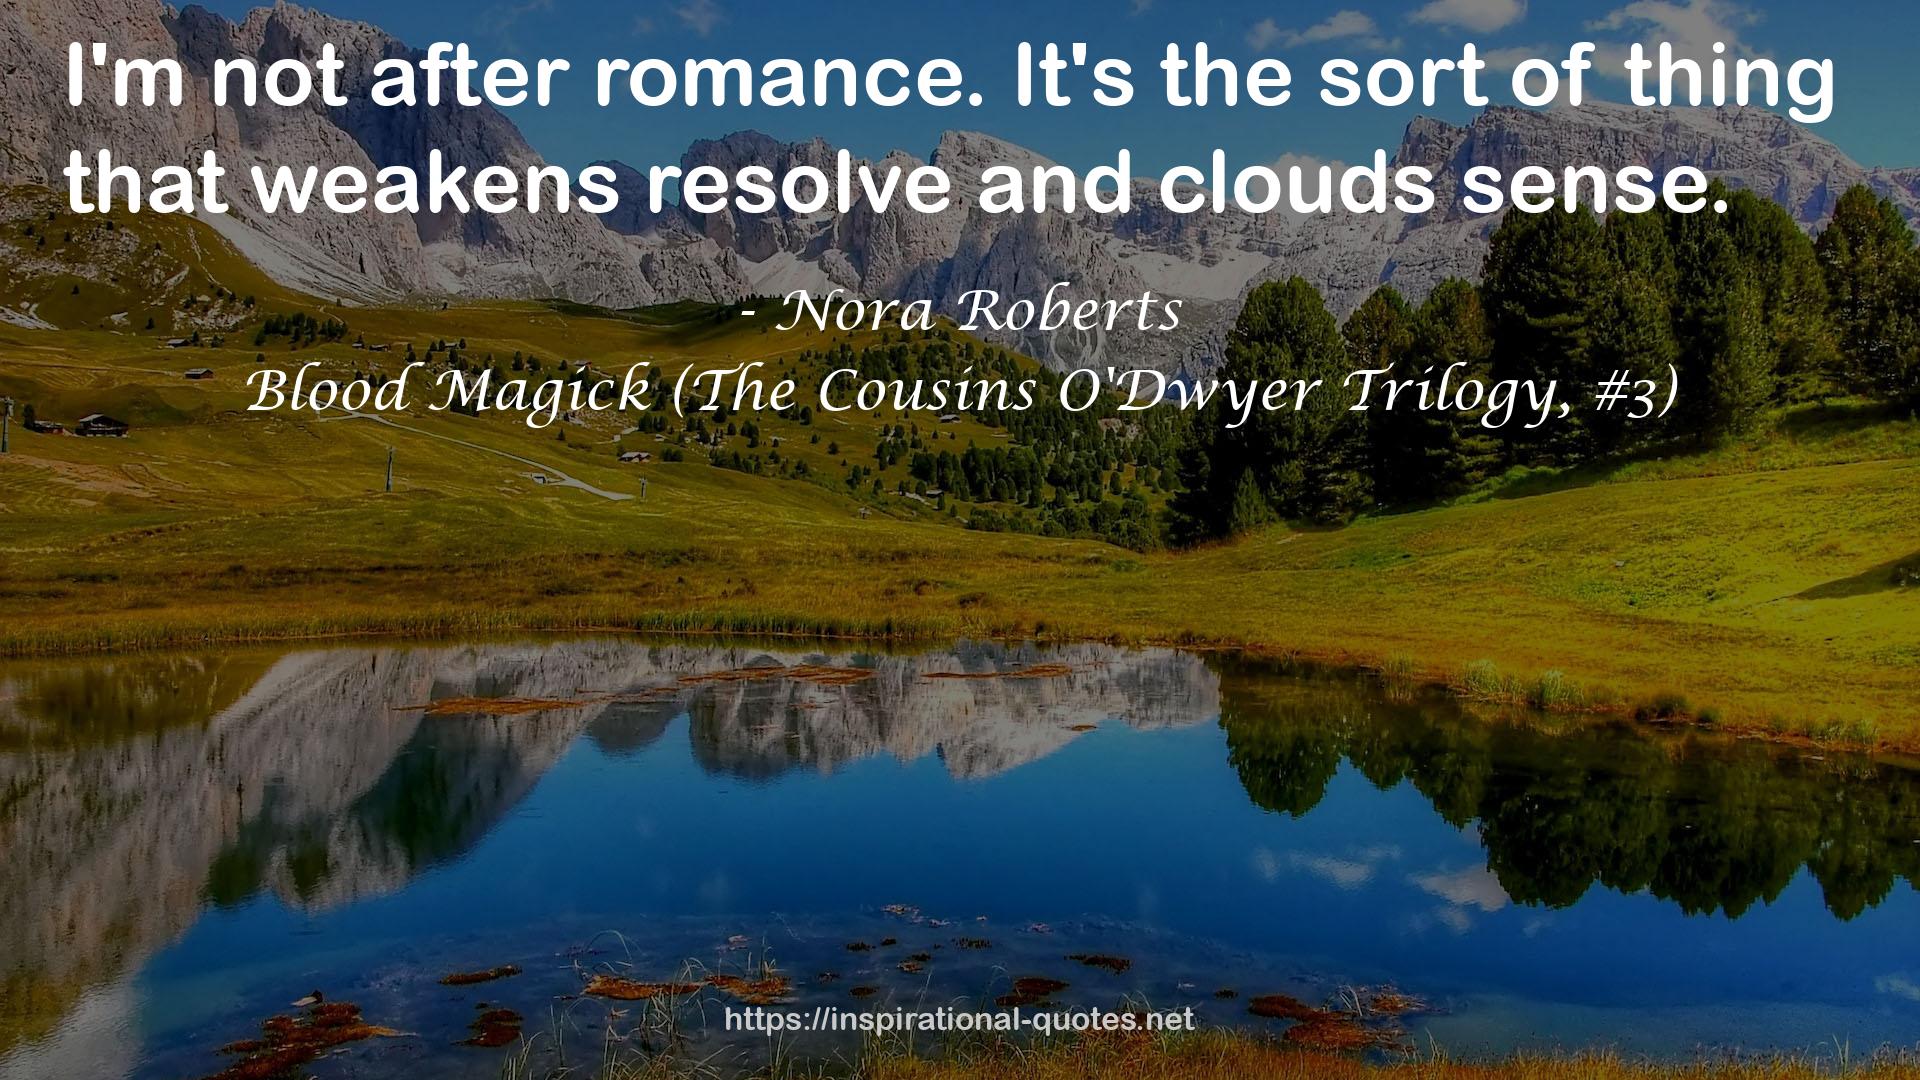 Blood Magick (The Cousins O'Dwyer Trilogy, #3) QUOTES